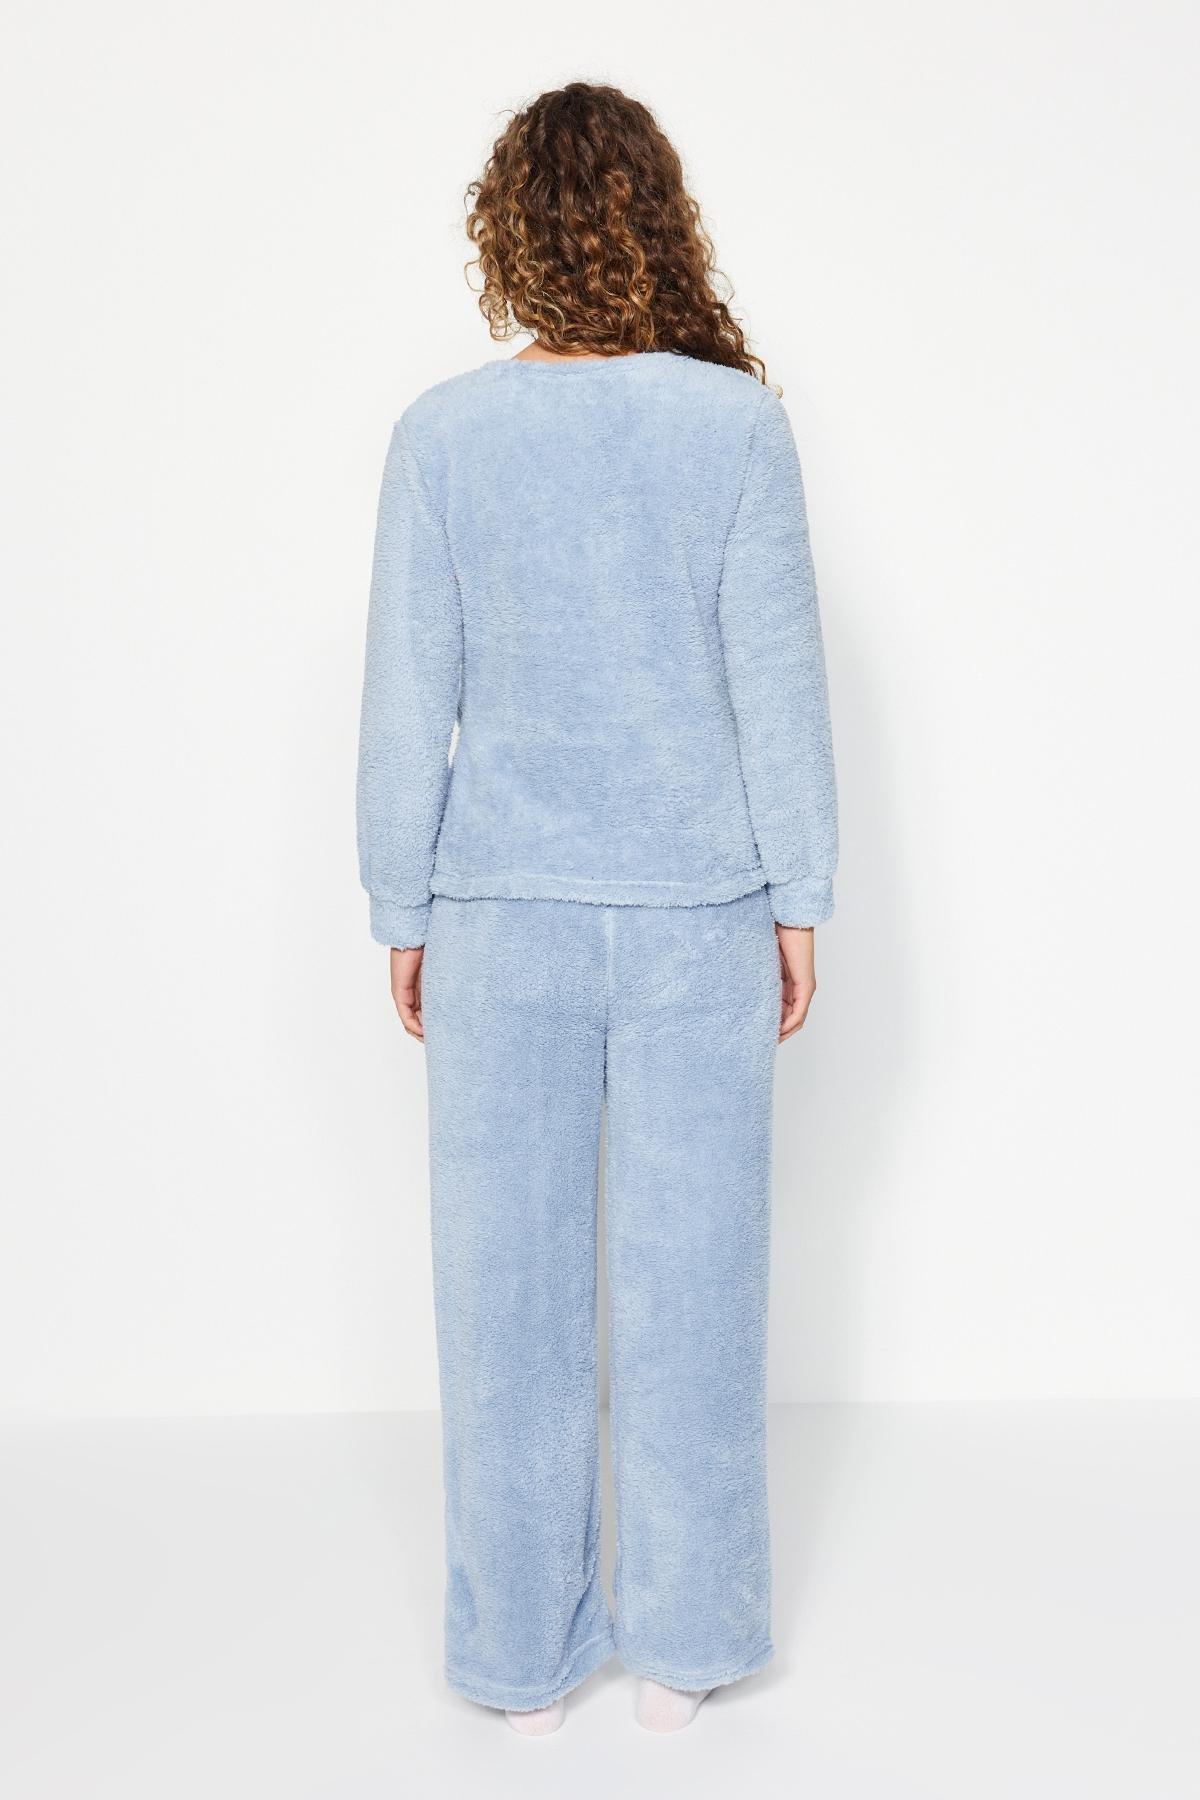 Trendyol - Blue Double-Breasted Knitted Pyjamas Set